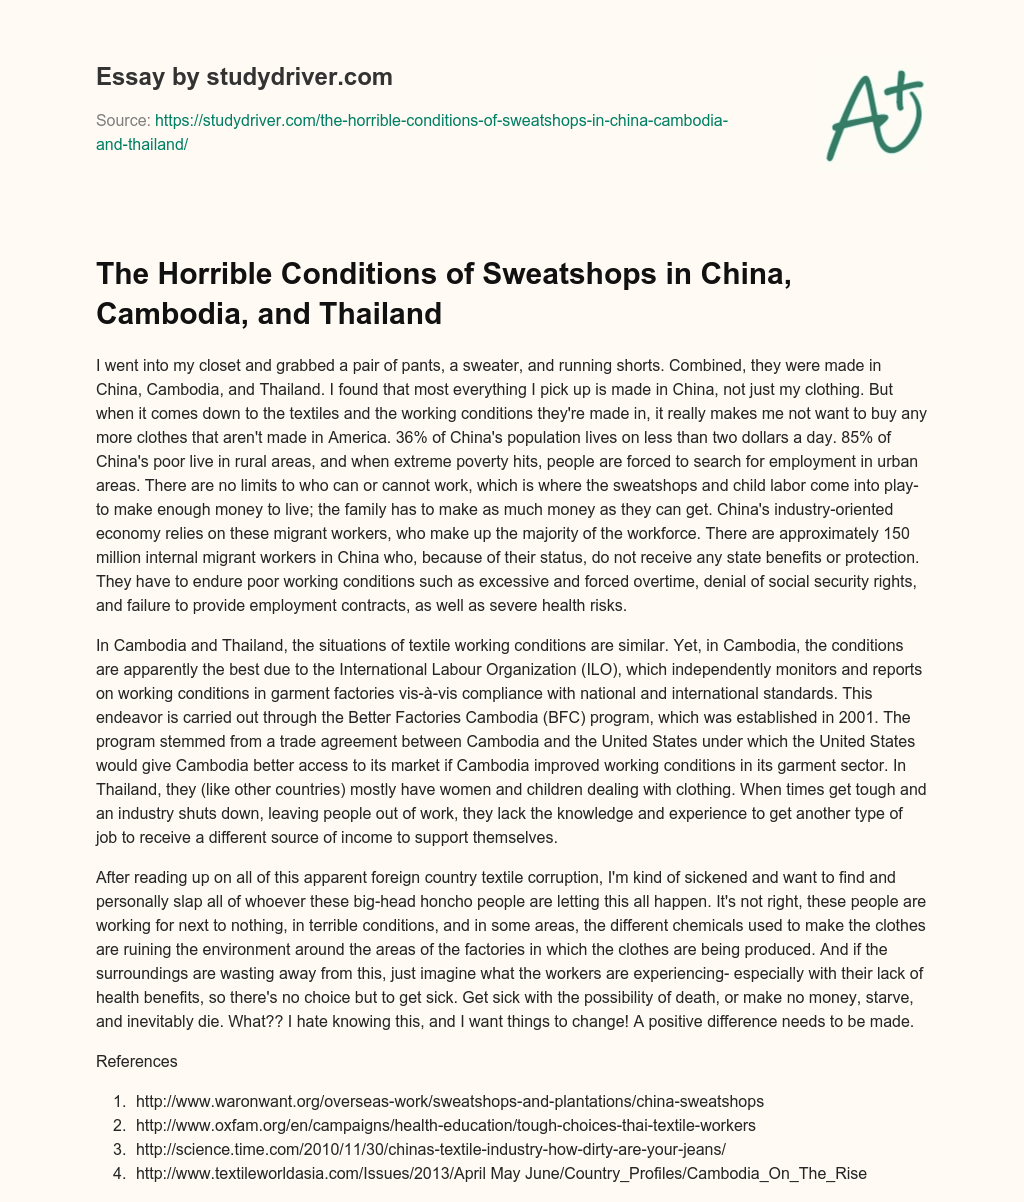 The Horrible Conditions of Sweatshops in China, Cambodia, and Thailand essay